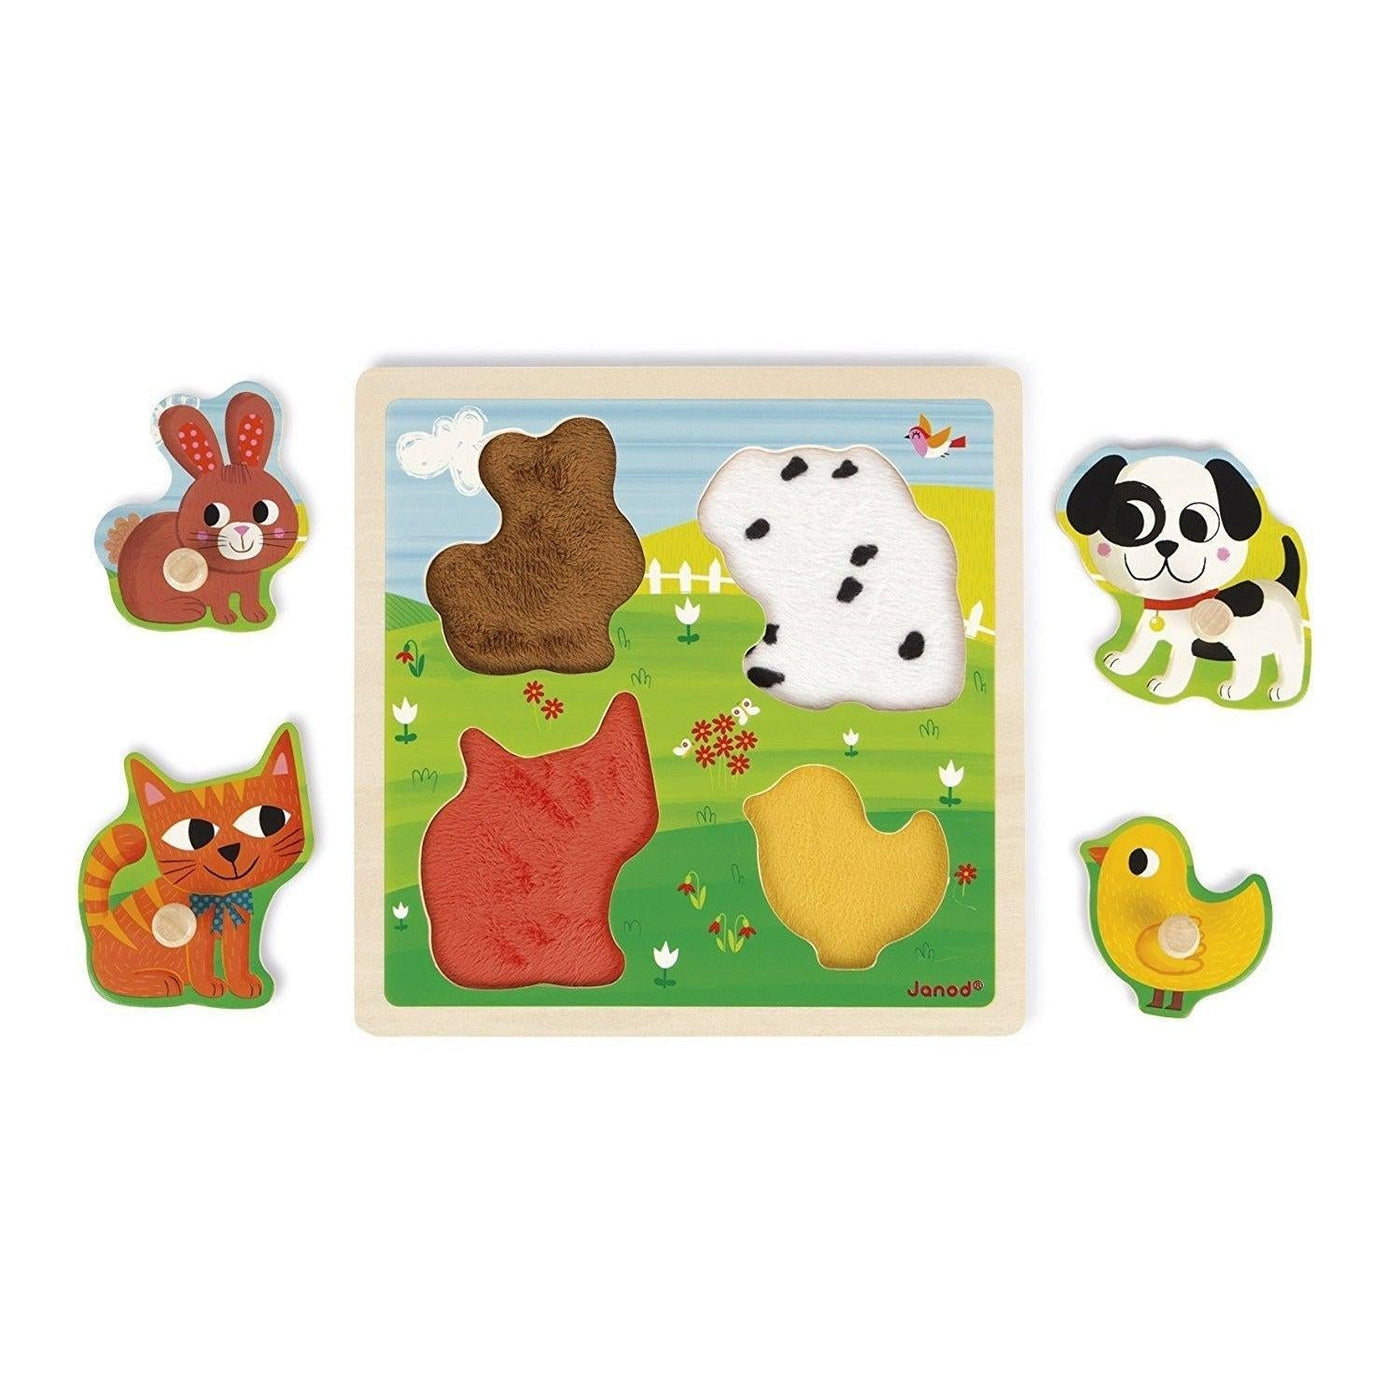 Tactile Wooden Peg Puzzle "My First Animals"